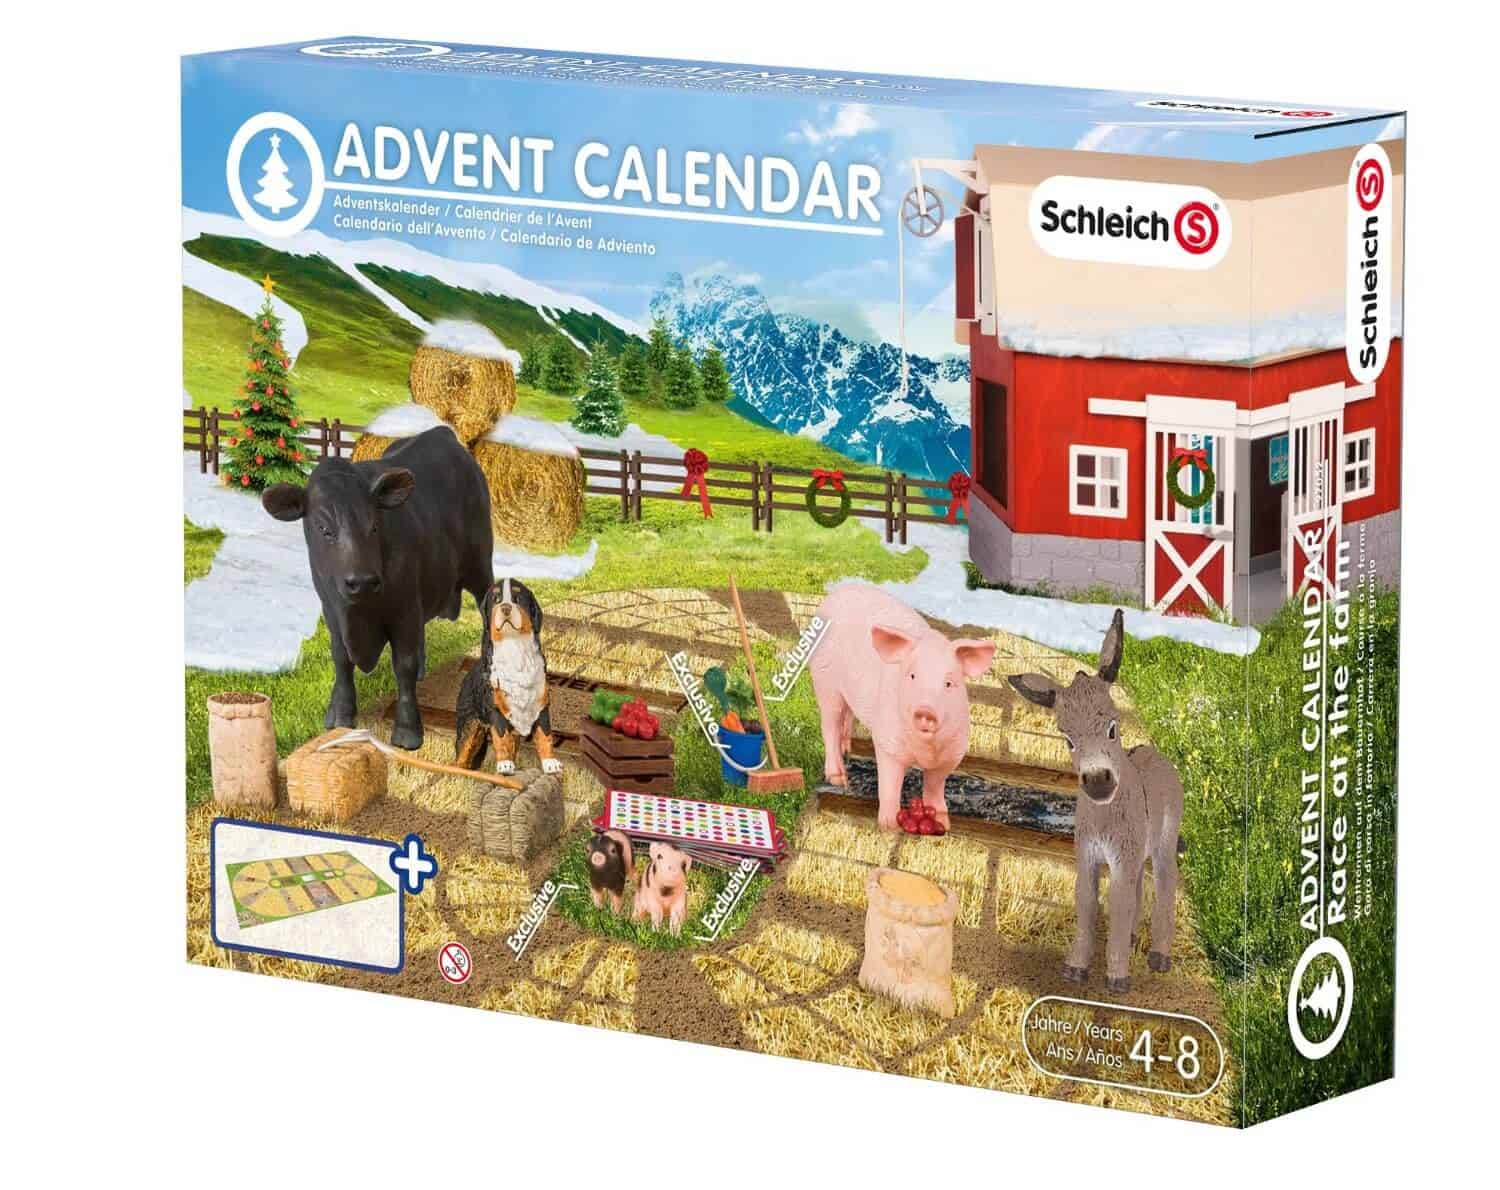 Schleich Advent Calendars Reviews Get All The Details At Hello